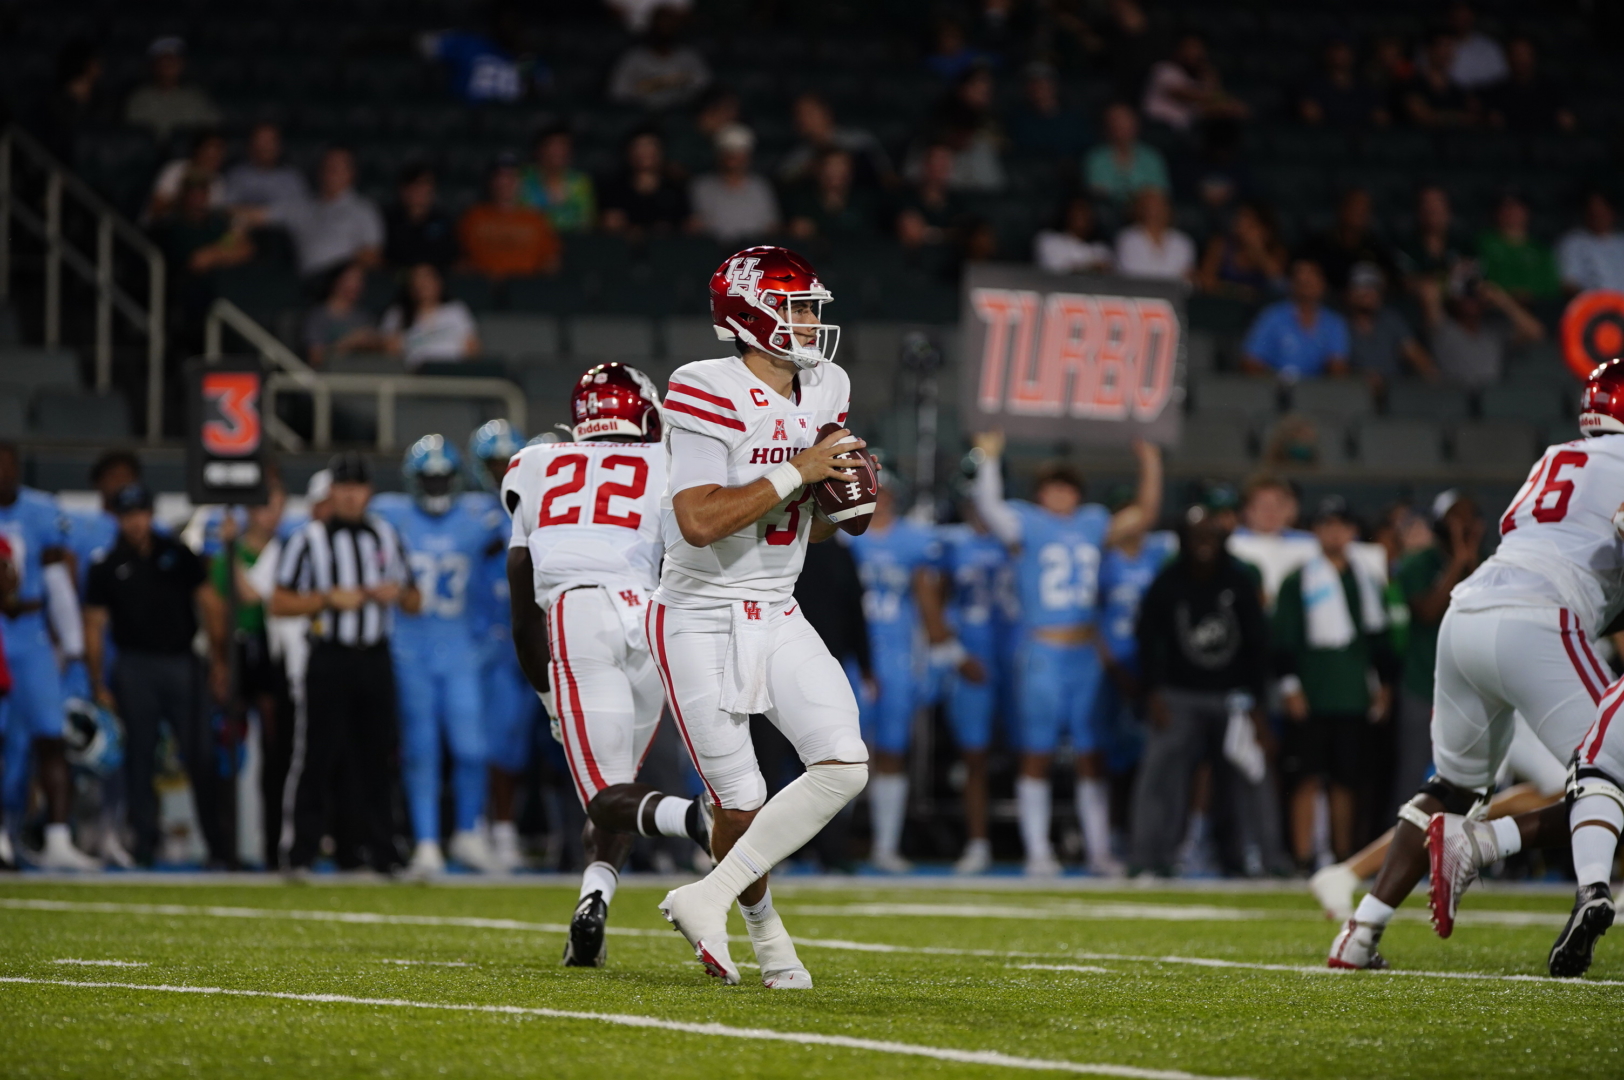 UH football won its fifth straight game Thursday night, defeating Tulane to stay perfect in AAC play. | Courtesy of UH athletics